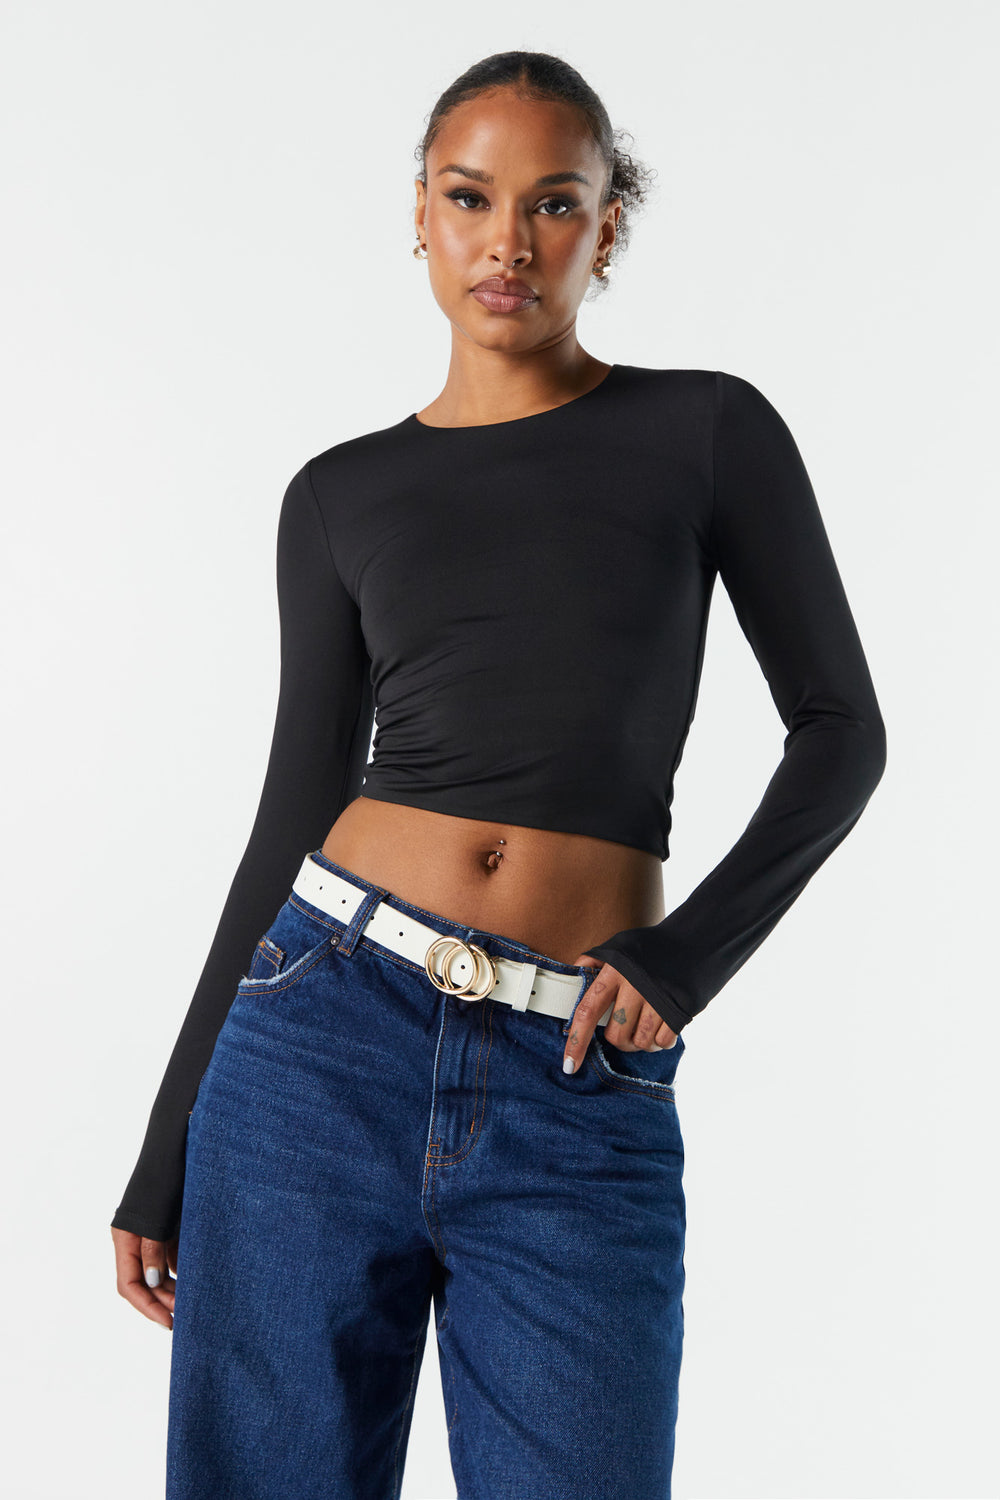 Contour Cropped Long Sleeve Top Contour Cropped Long Sleeve Top 4